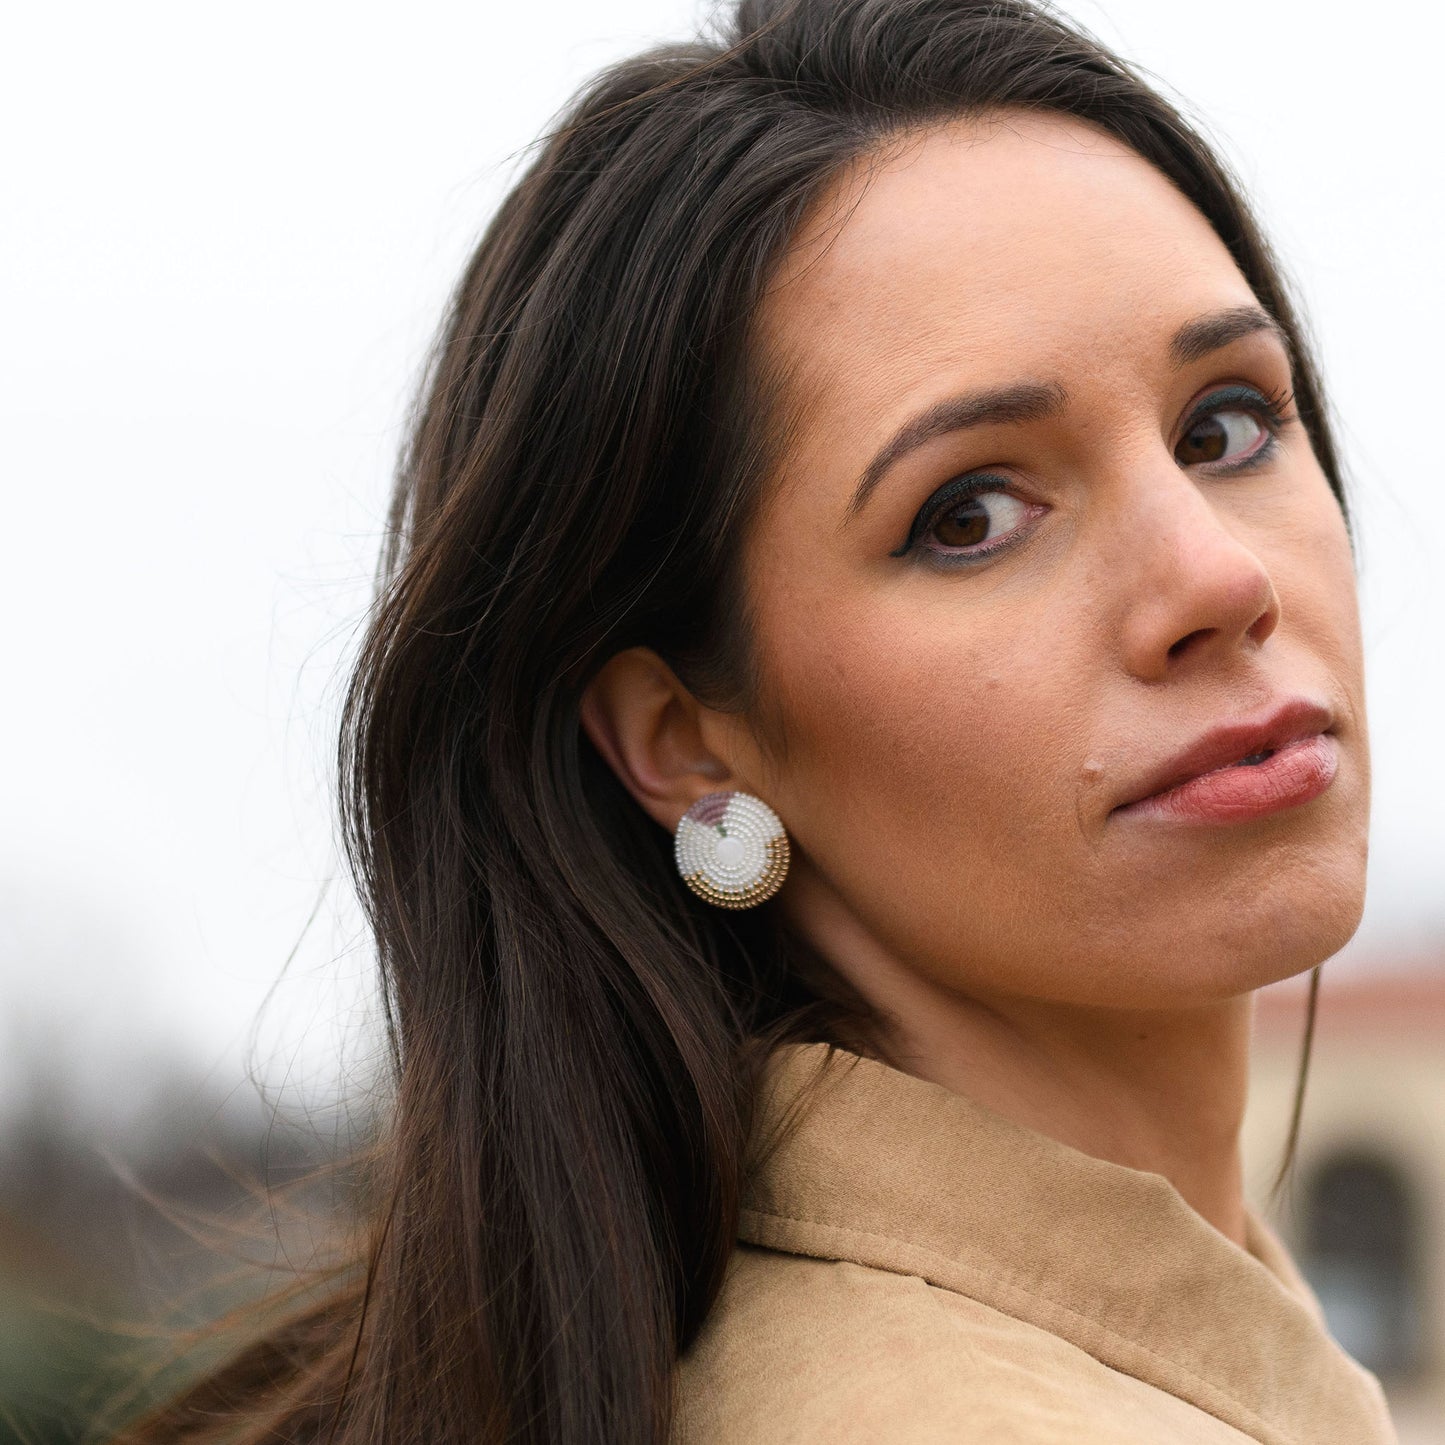 Model Chelsea Hicks looking over her shoulder and wearing Cheyanne Symone’s beaded “In Bloom” Statement Earrings. The earrings are white with a small gold beaded base representing the soil and pink at the top representing a blooming tulip.